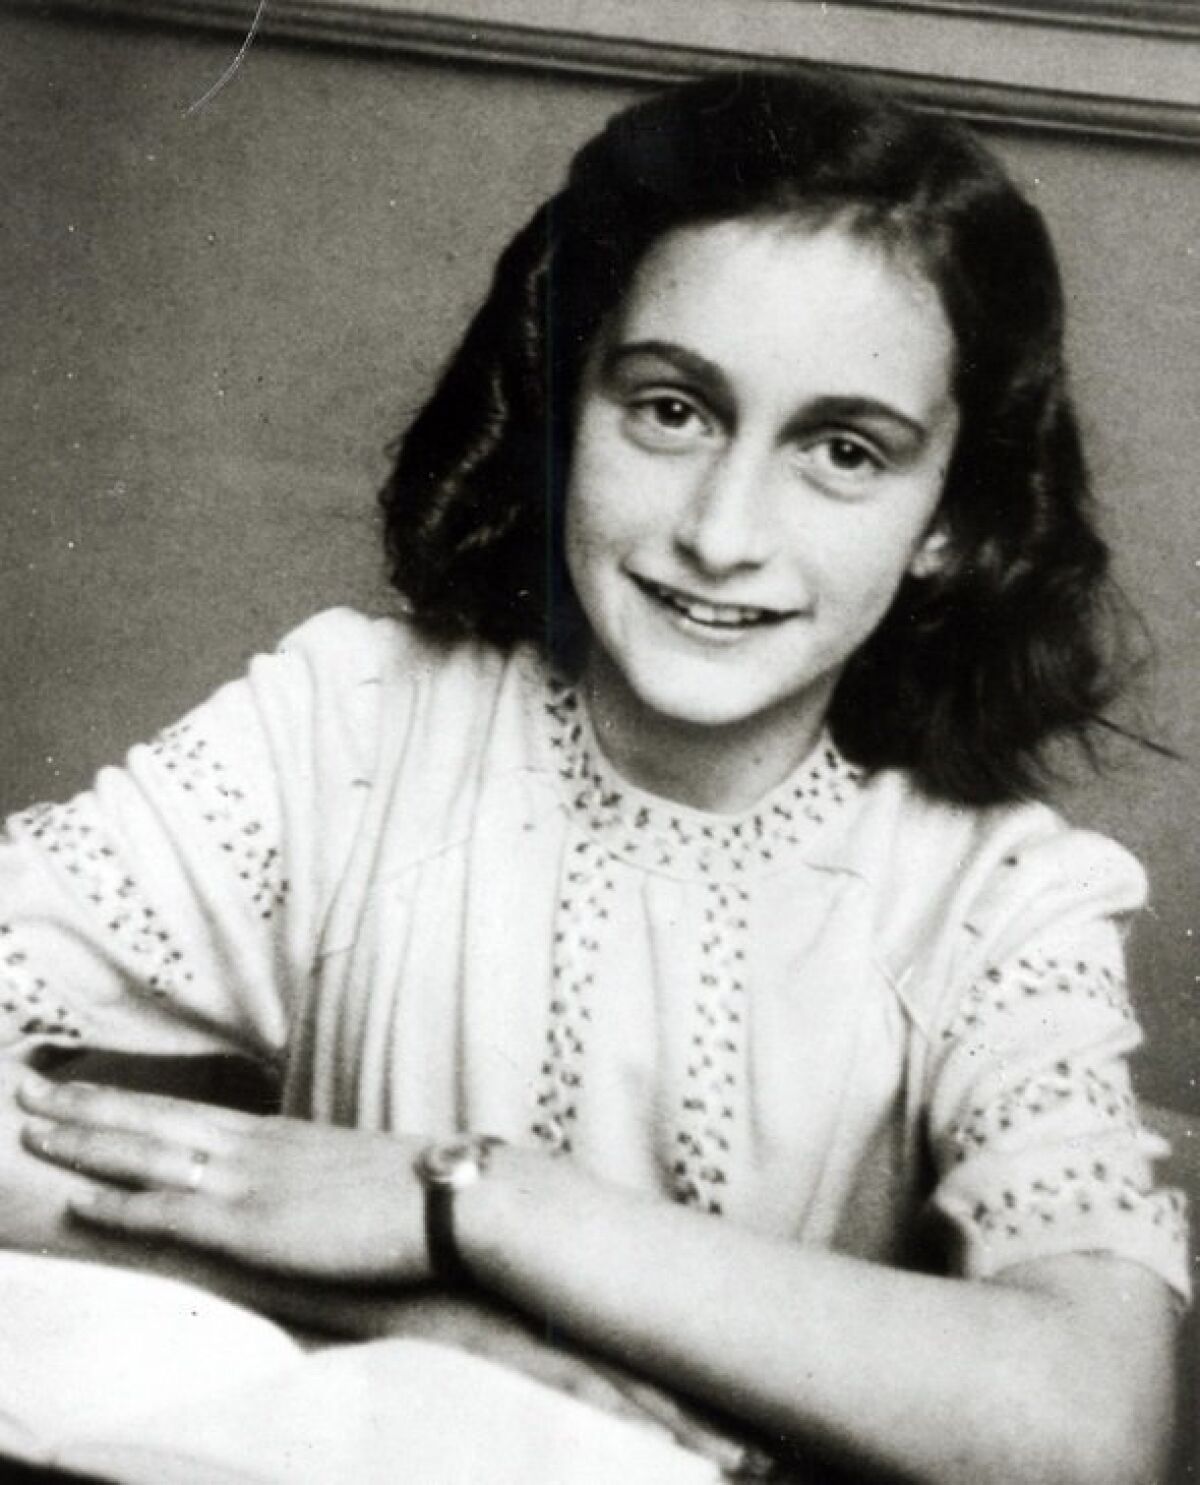 A one-day exhibition titled "Anne Frank — A History for Today" will be hosted by the Timken Museum of Art on Thursday, Feb. 6.